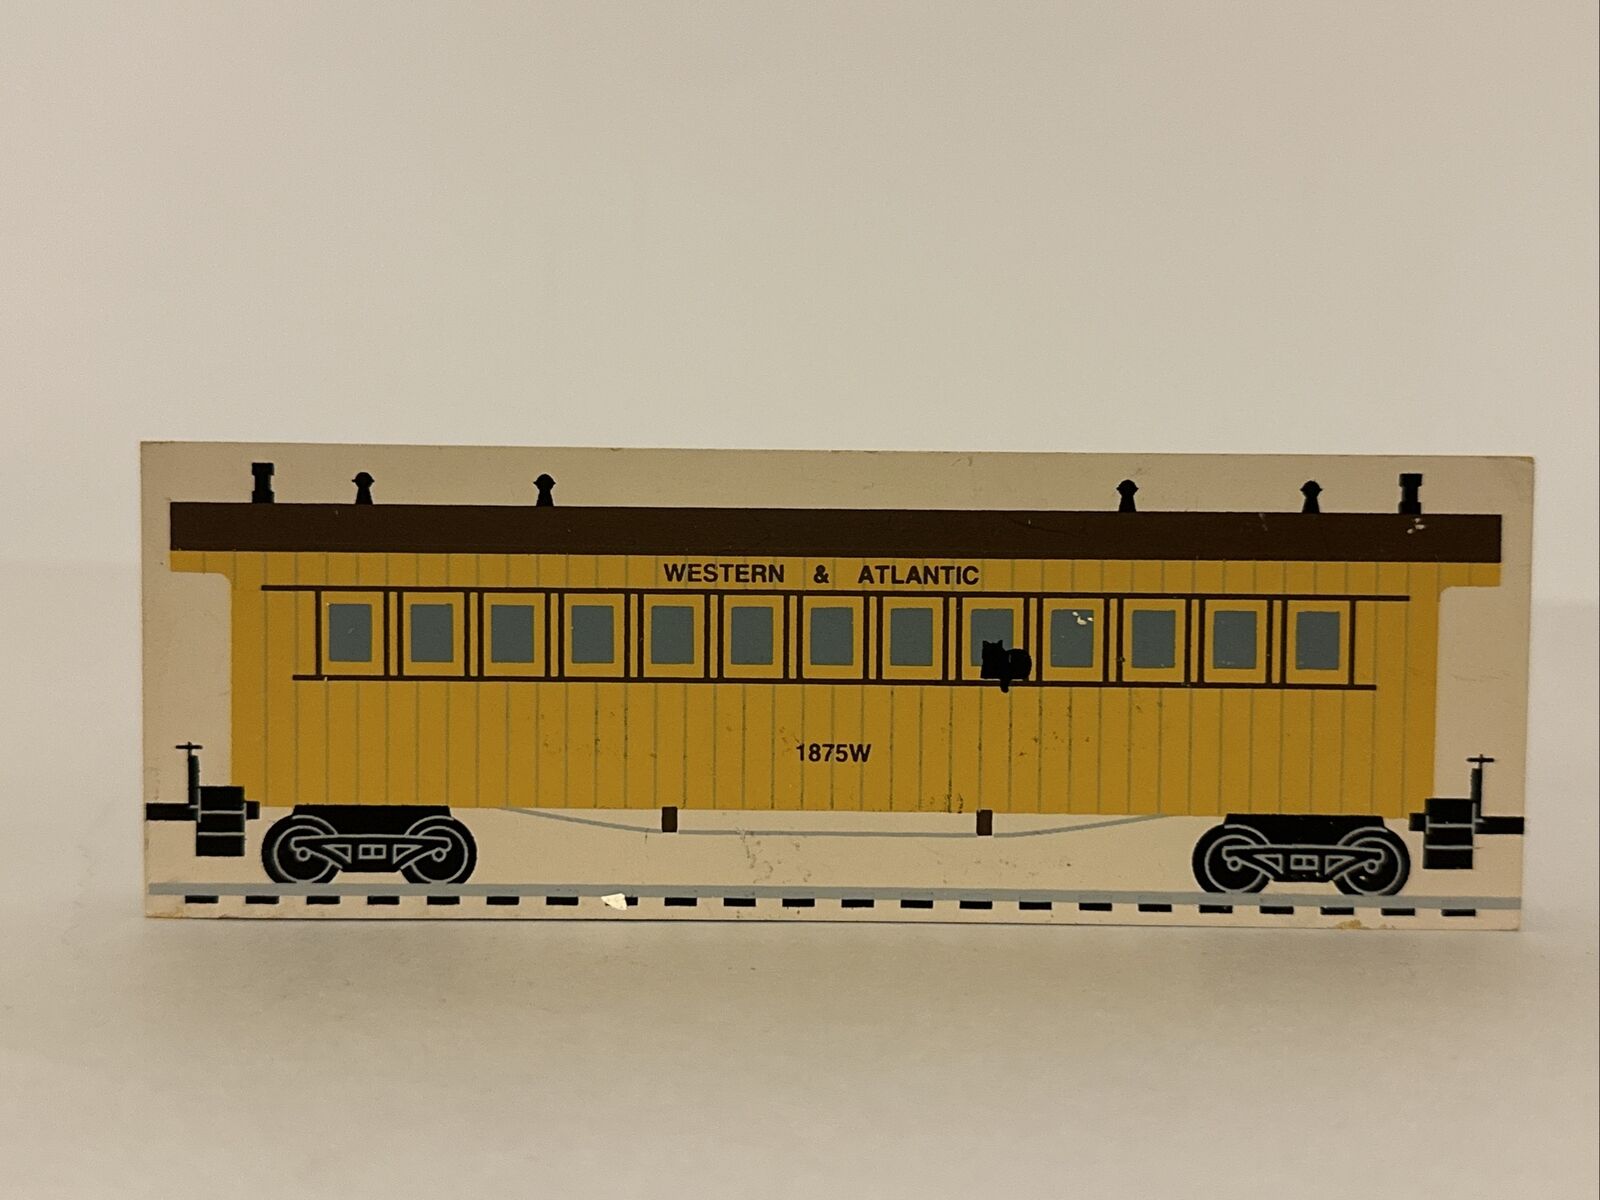 The Cats Meow Village Lionel Western & Atlantic Illuminated Coach Car Whistle 95